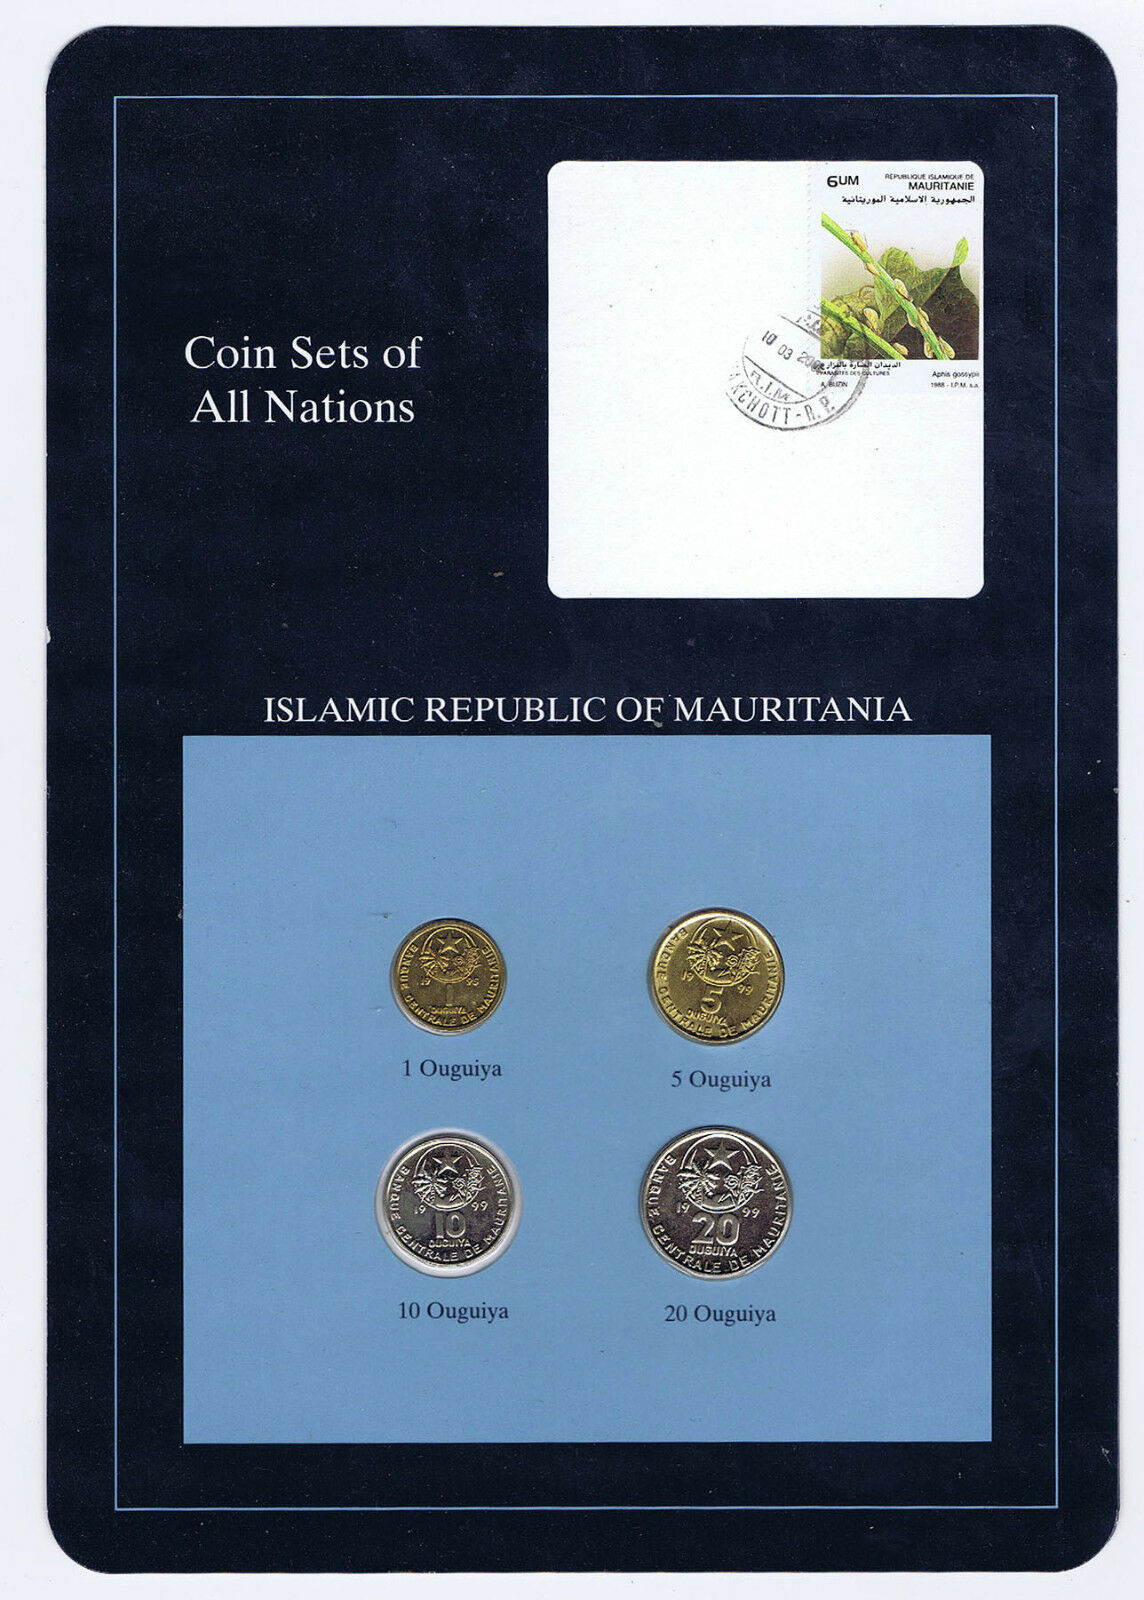 MAURITANIA (WEST AFRICA) UNC 4 COIN SET of ALL NATIONS in PANEL w/ STAMP + INFO